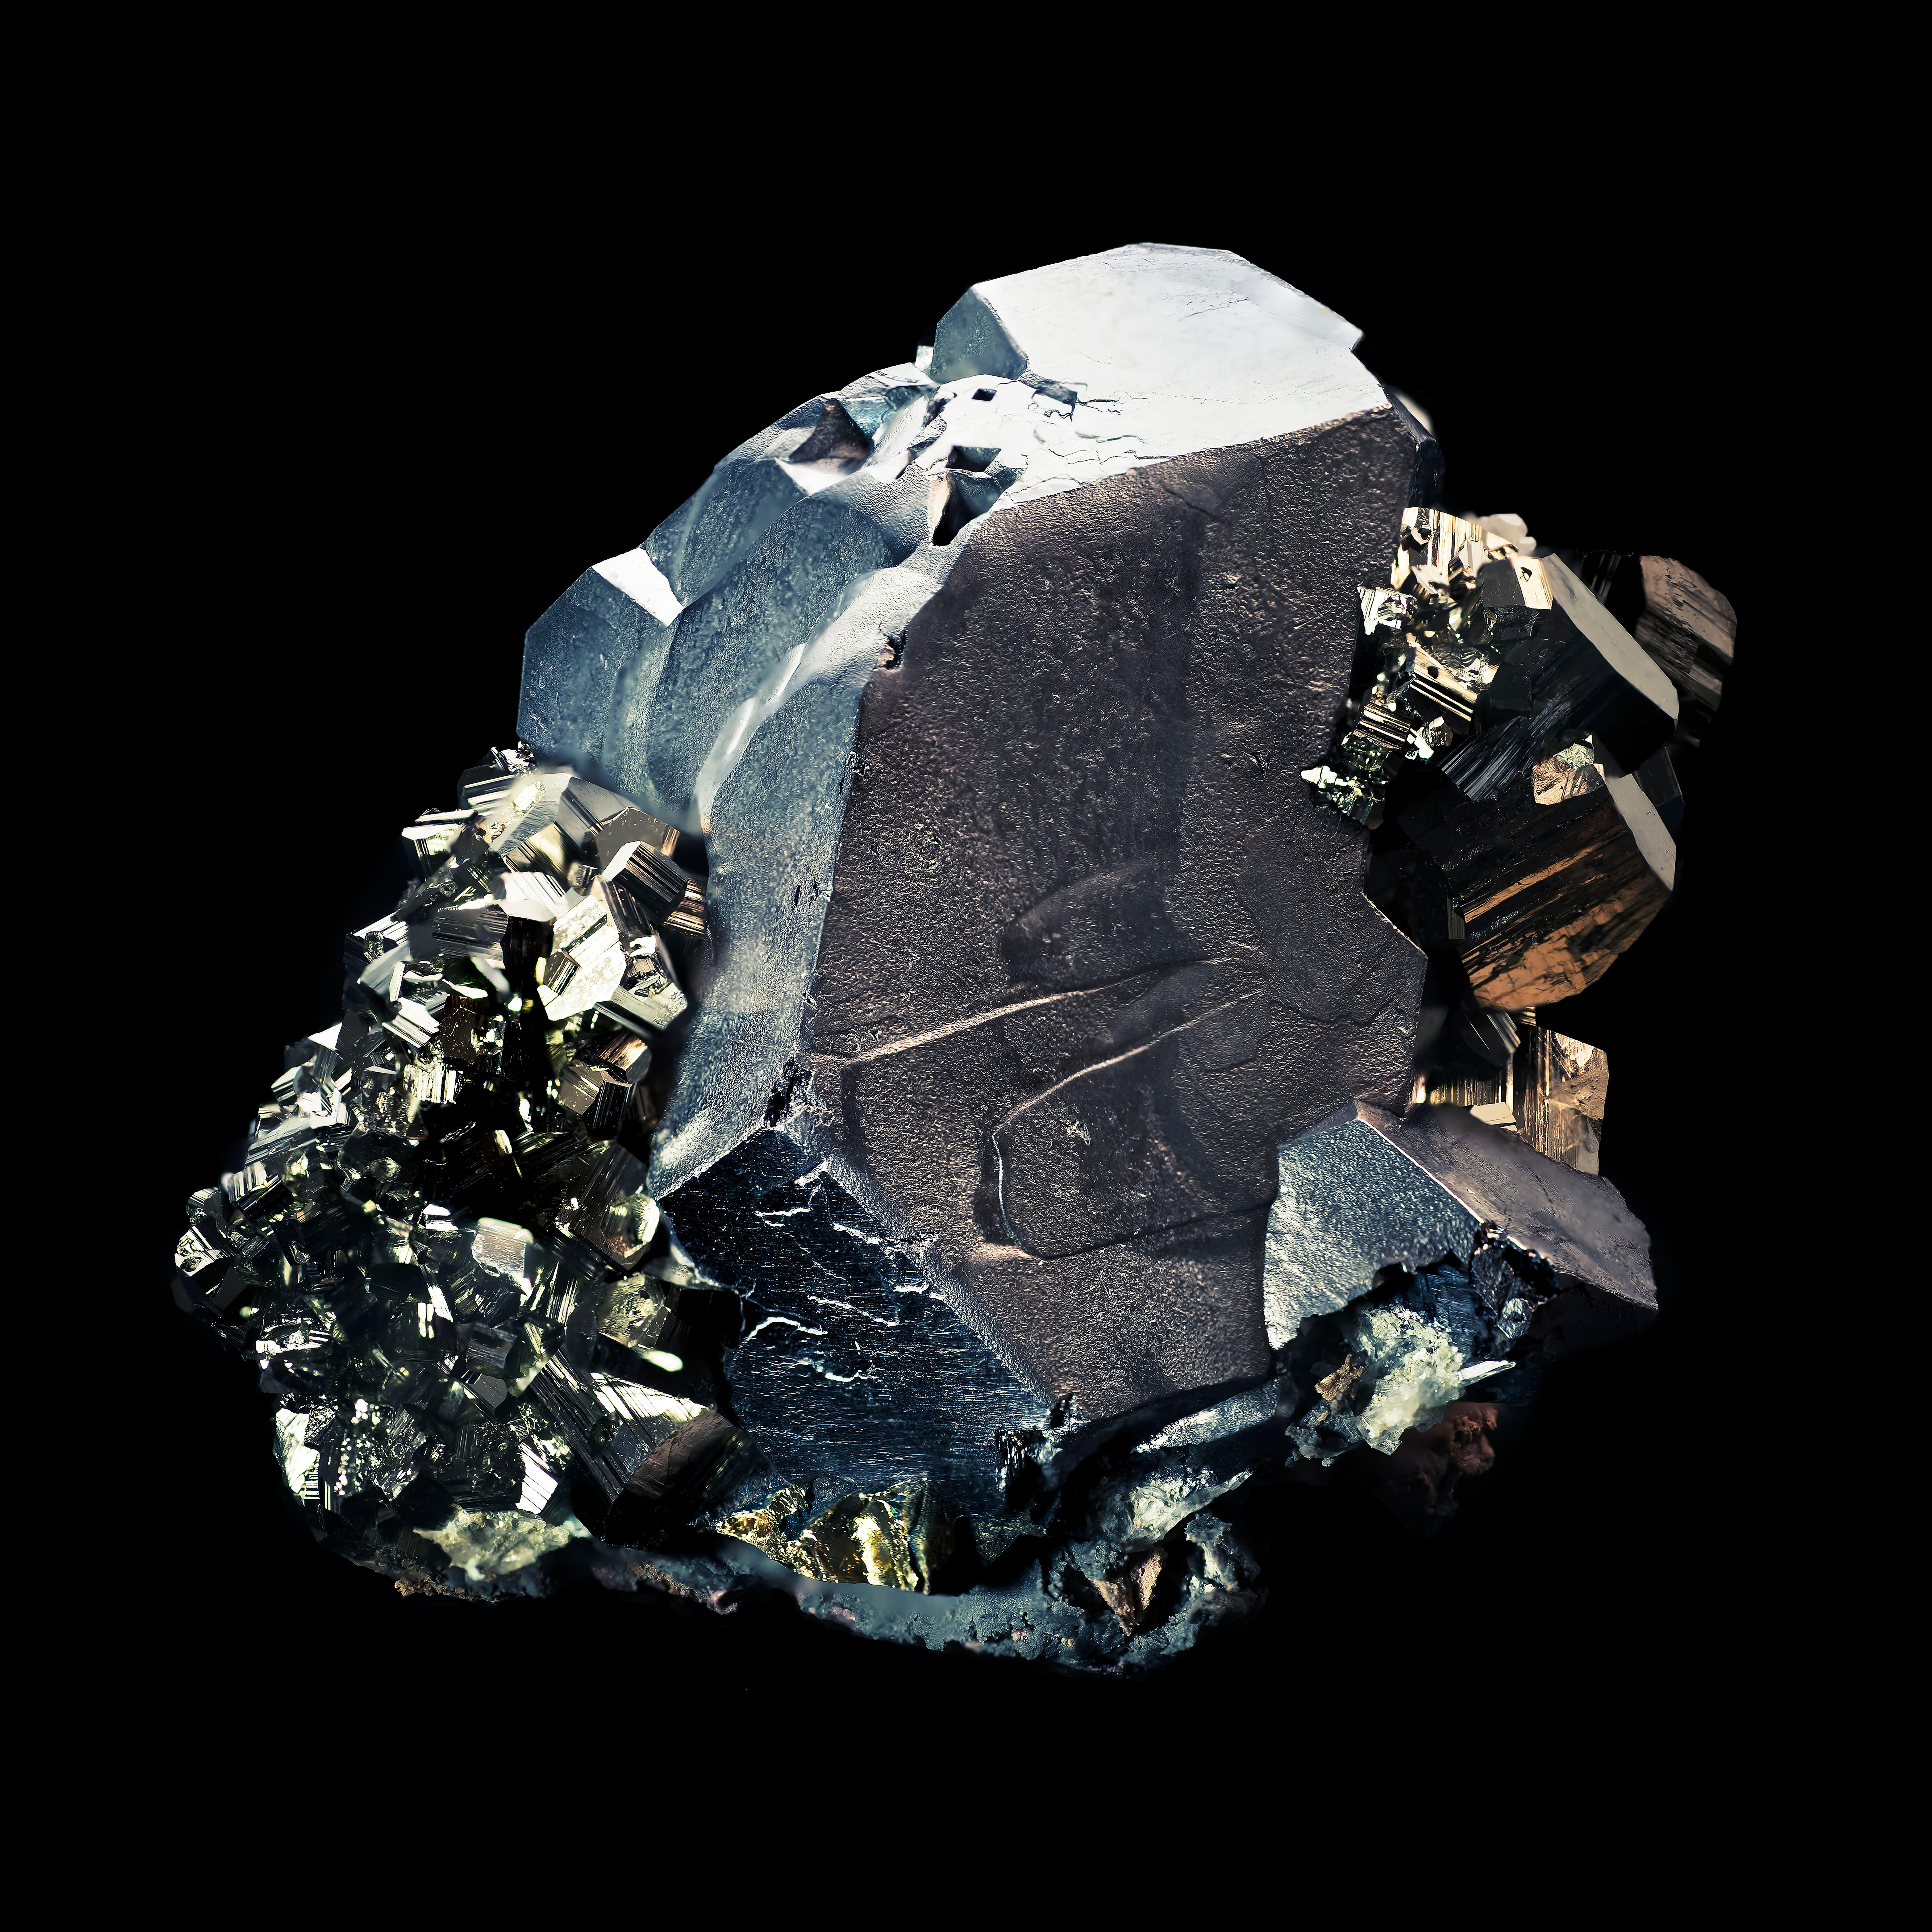 Christian Houge Still-Life Photograph - `Skeletal Galene`. Oslo. Edition of 3 - `In;Human Nature`  mineral rock nature 